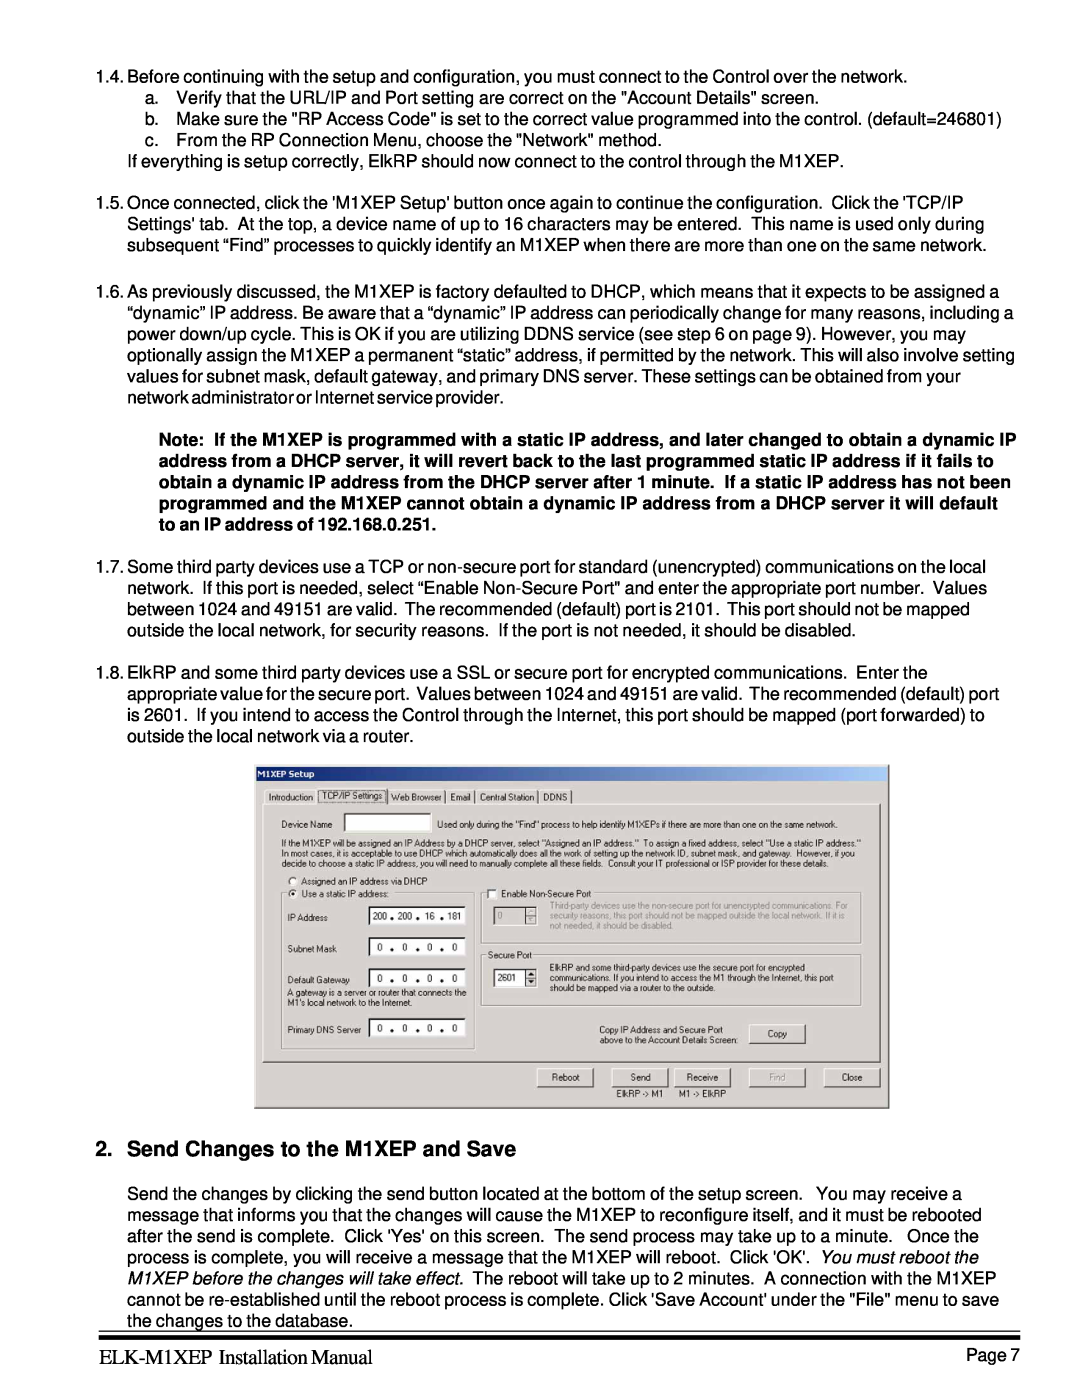 Elk installation manual Send Changes to the M1XEP and Save, ELK-M1XEP Installation Manual 